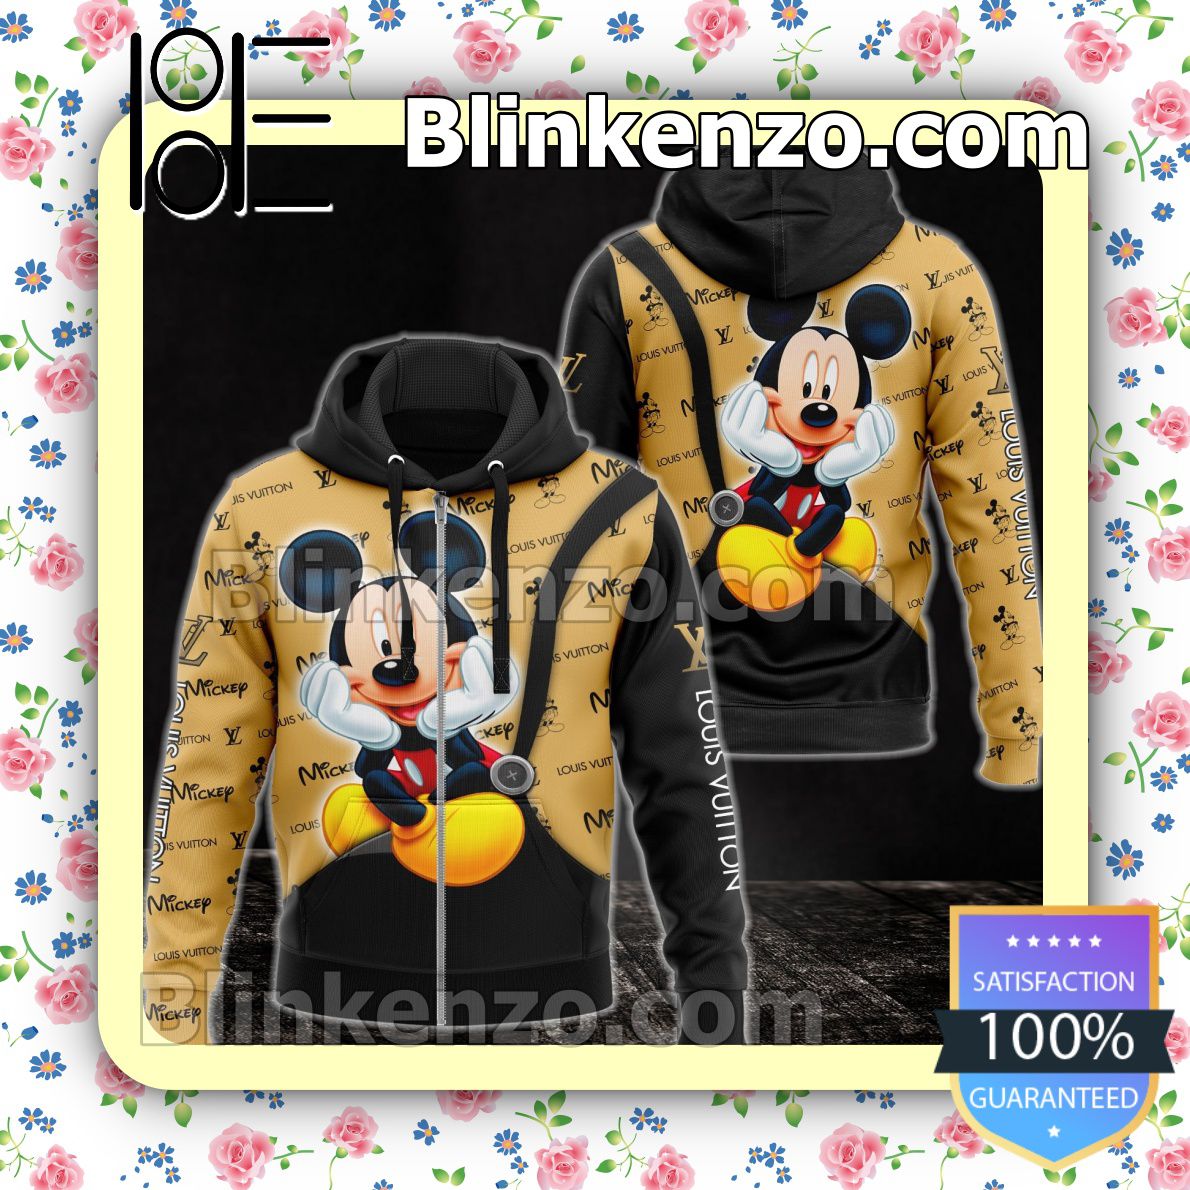 Gorgeous Louis Vuitton With Cute Mickey Mouse Full-Zip Hooded Fleece Sweatshirt